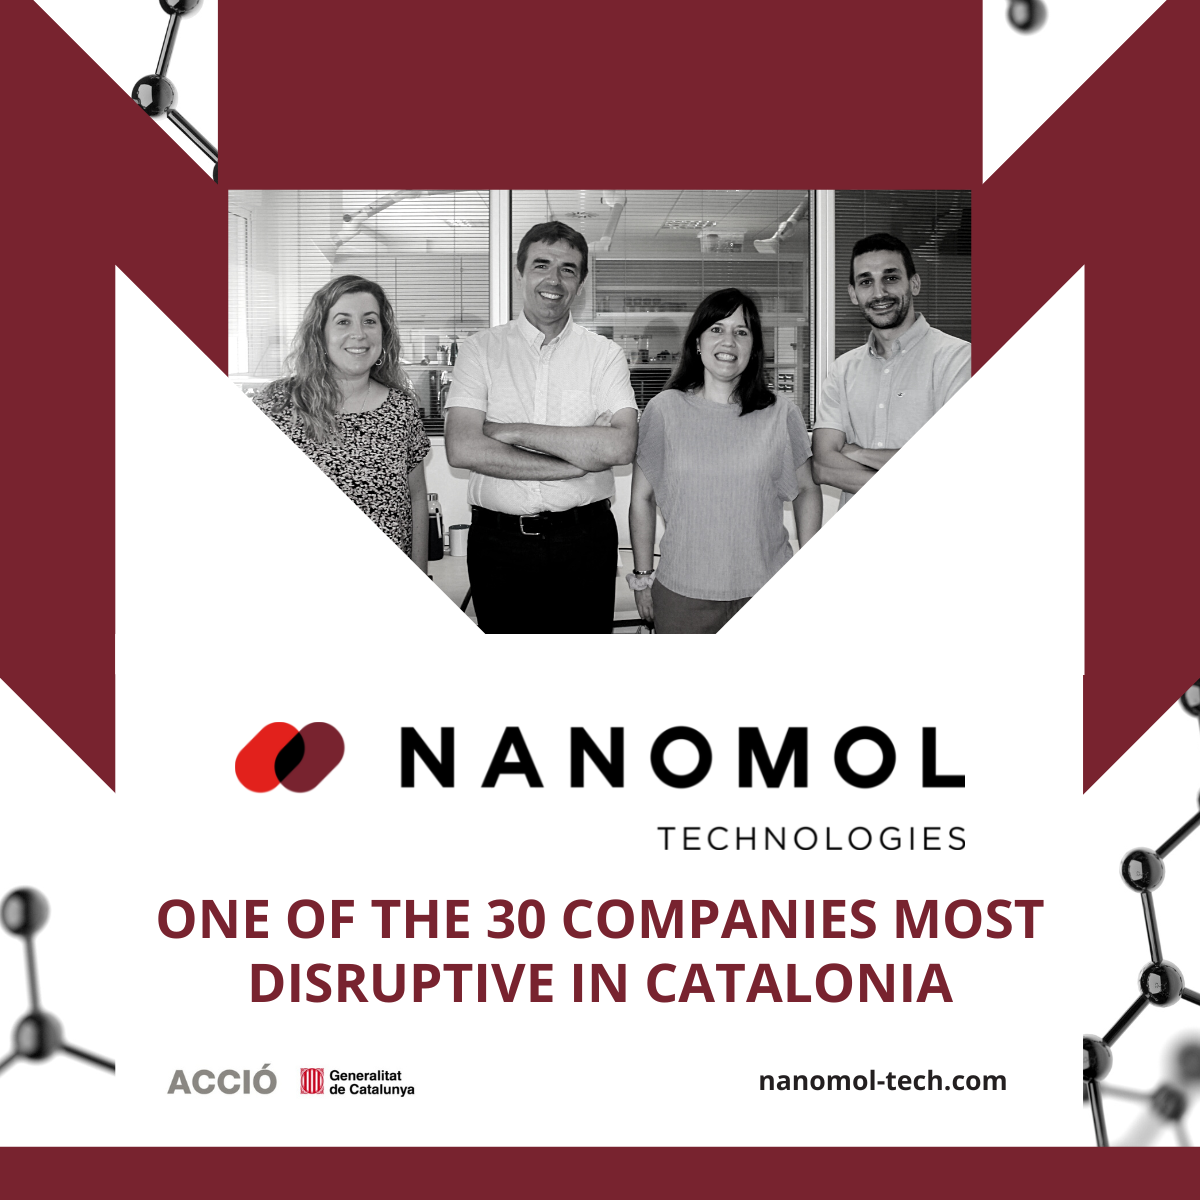 Nanomol Technologies, one of the 30 finalists in the 2nd edition of Catalonia Exponential Leaders